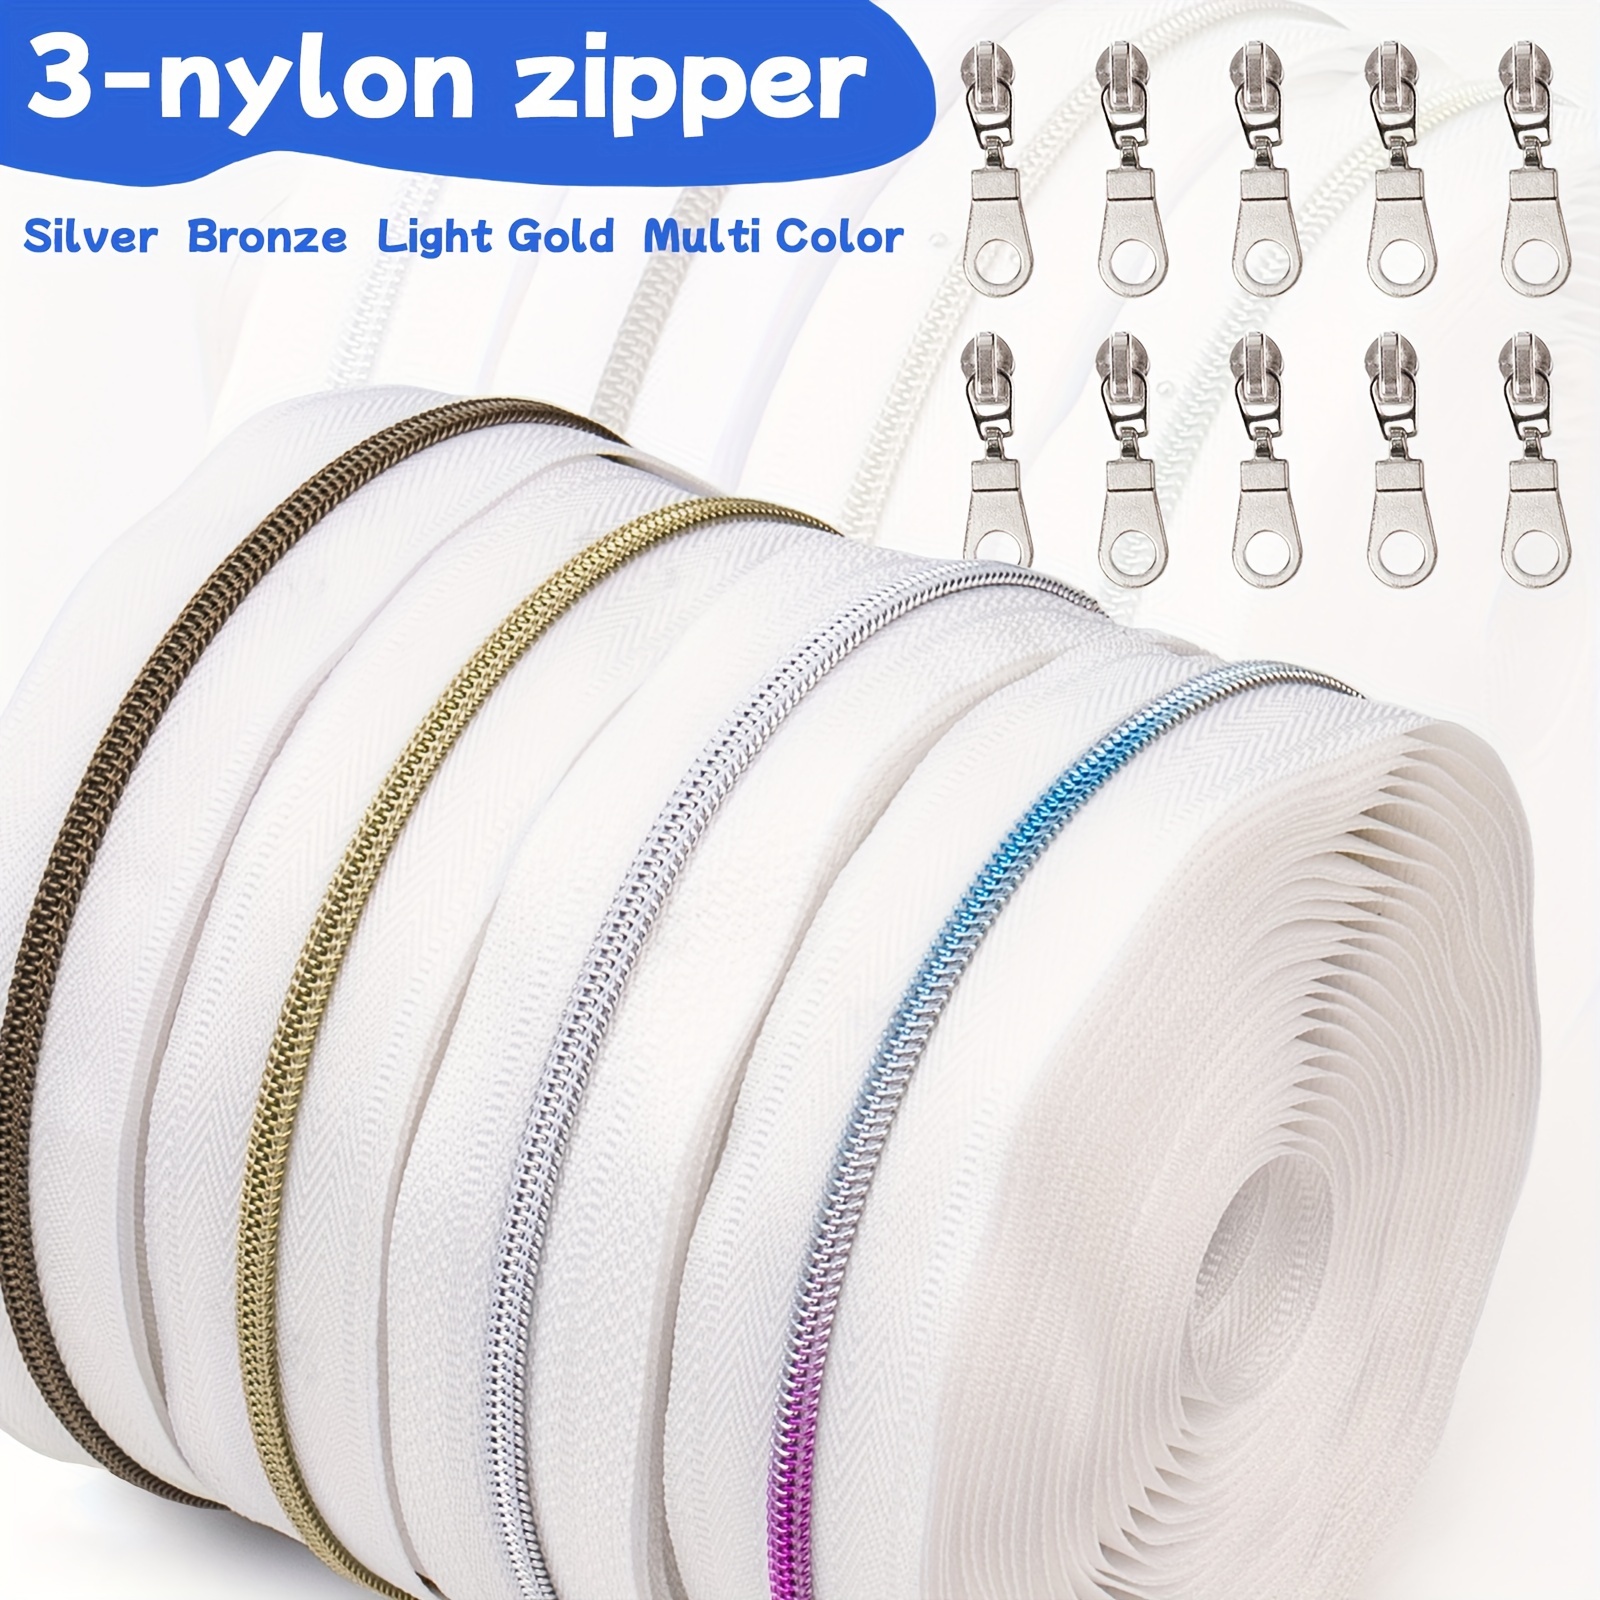 

1pc Nylon Zipper Roll With 10 Sliders, 3# Multi-color Light Golden, Bronze, Silvery Teeth, Diy Sewing Craft For Clothing, Bags, Home Textiles, Leather Goods - Durable & Versatile